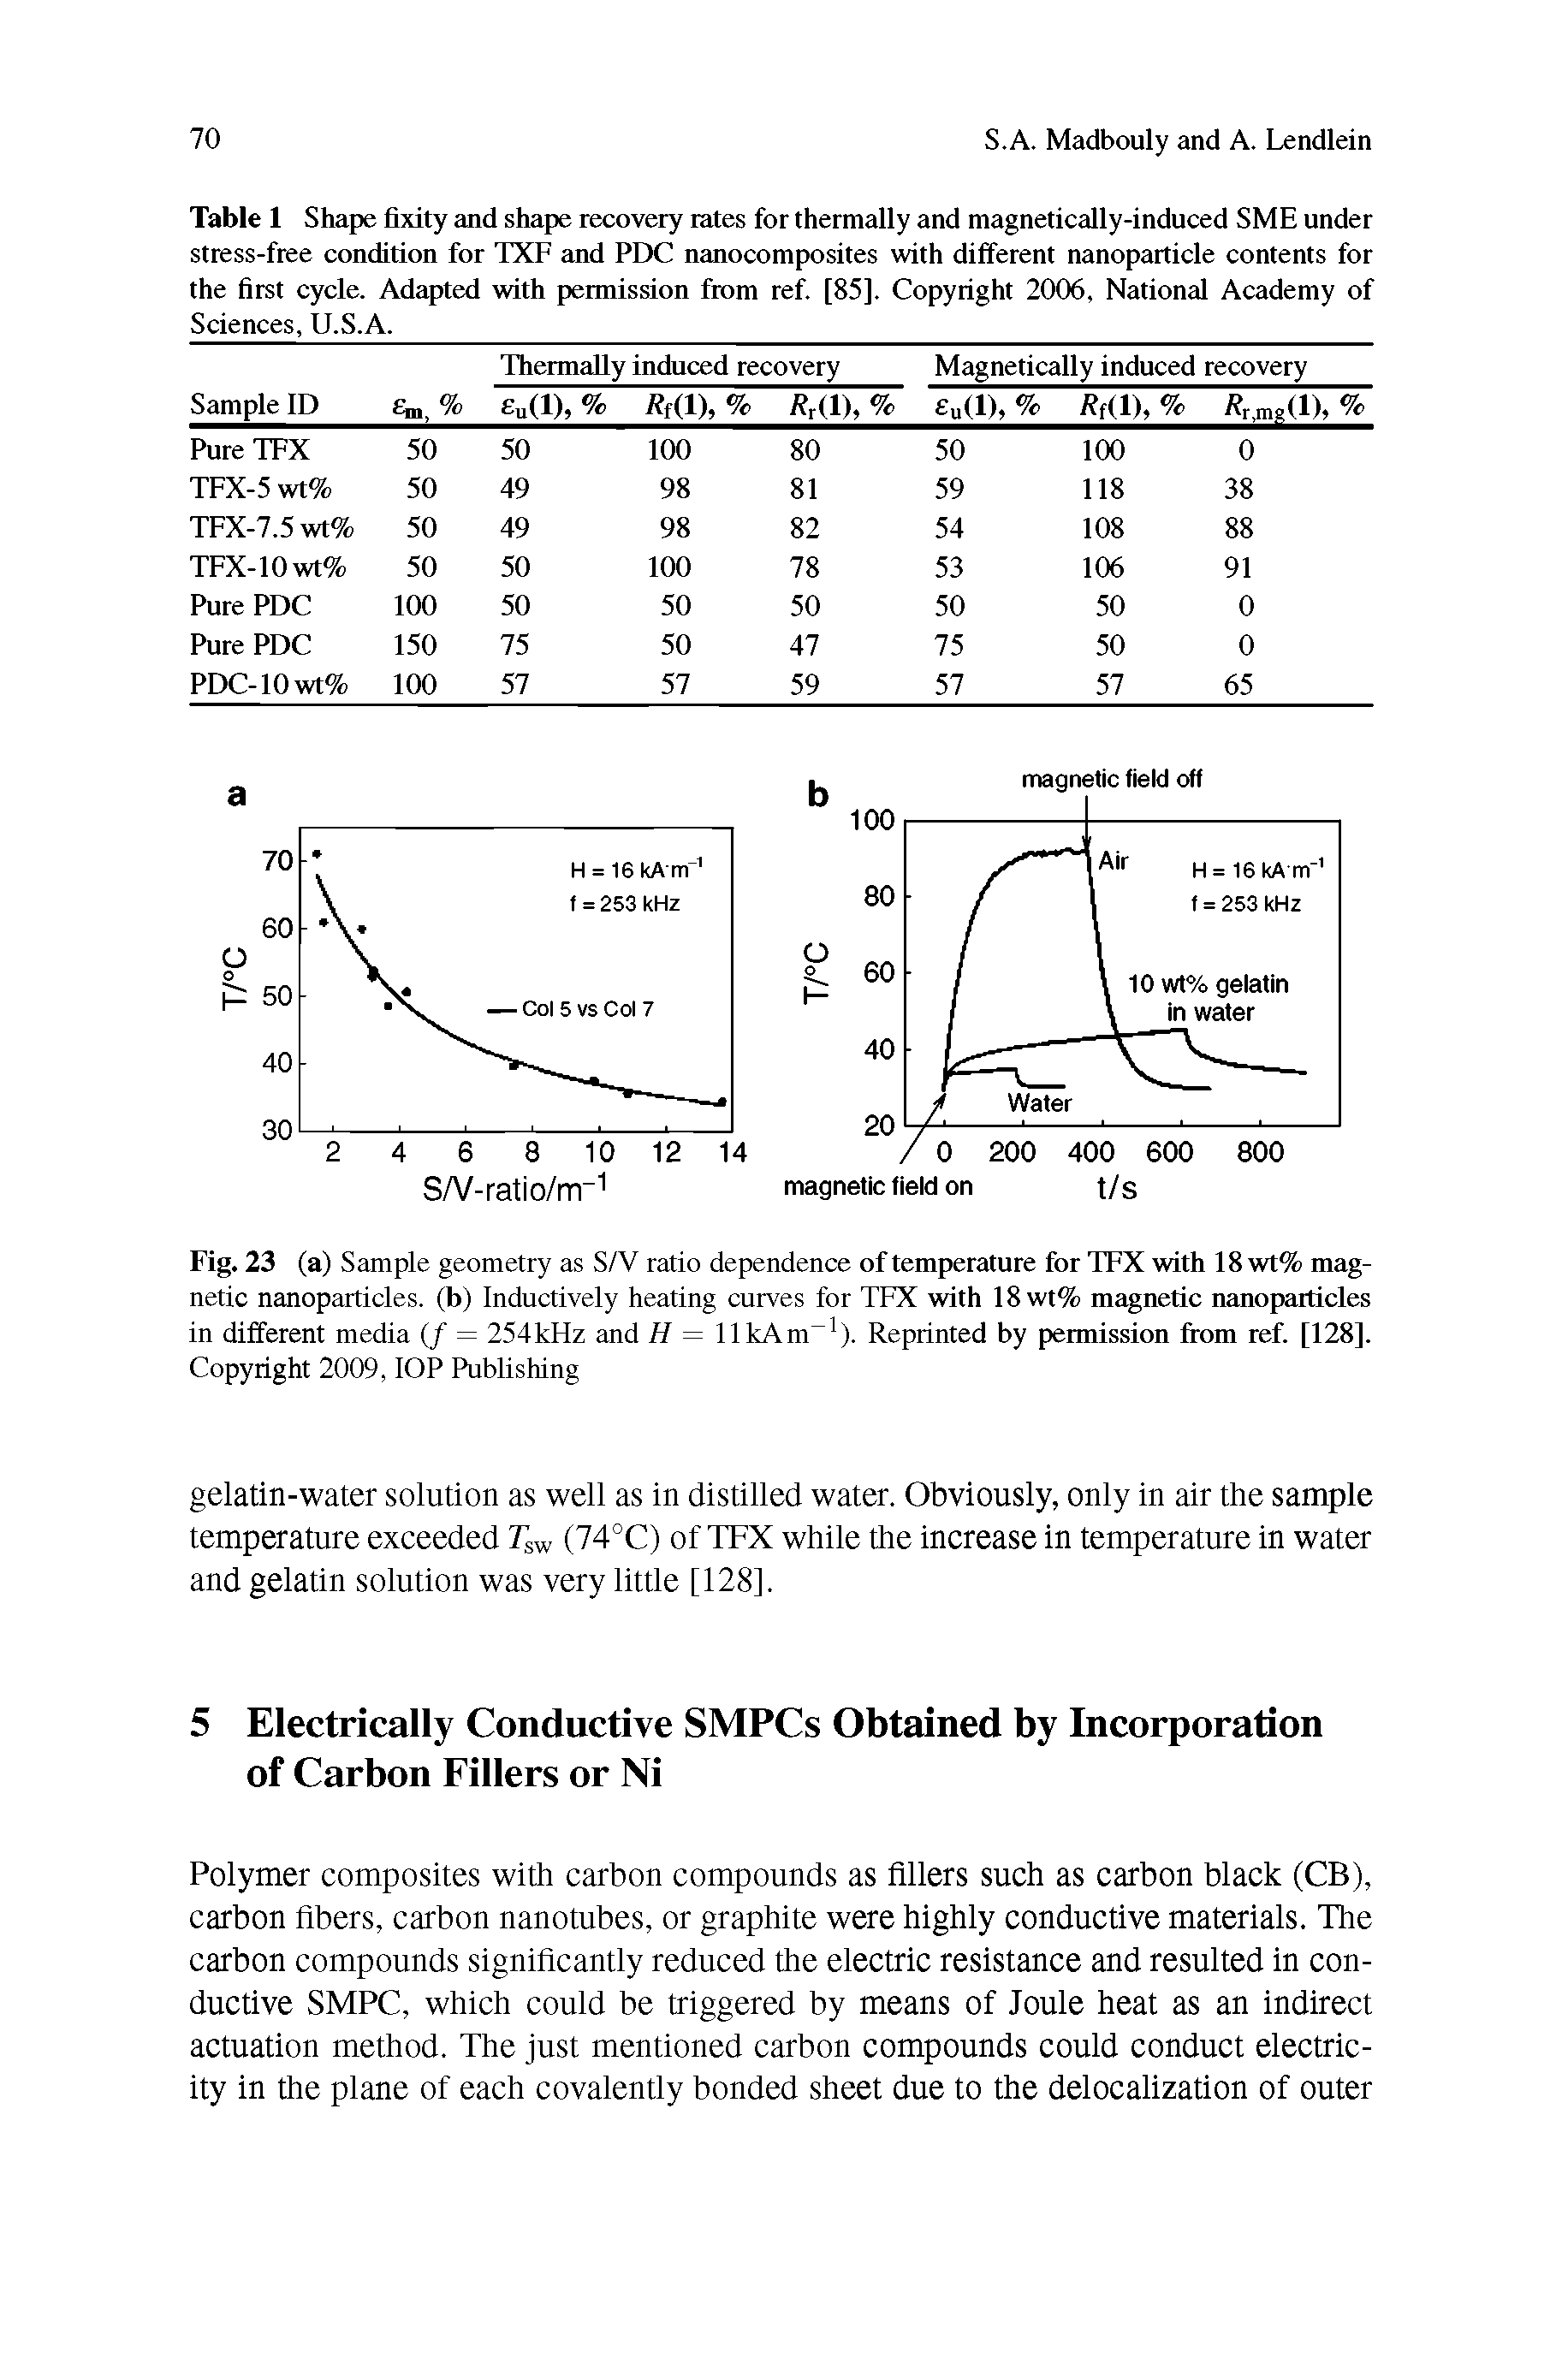 Table 1 Shape fixity and shape recovery rates for thermally and magnetically-induced SME under stress-free condition for TXF and PDC nanocomposites with ditferent nanoparticle contents for the first cycle. Adapted with permission from ref. [85]. Copyright 2006, National Academy of Sciences, U.S.A. ...